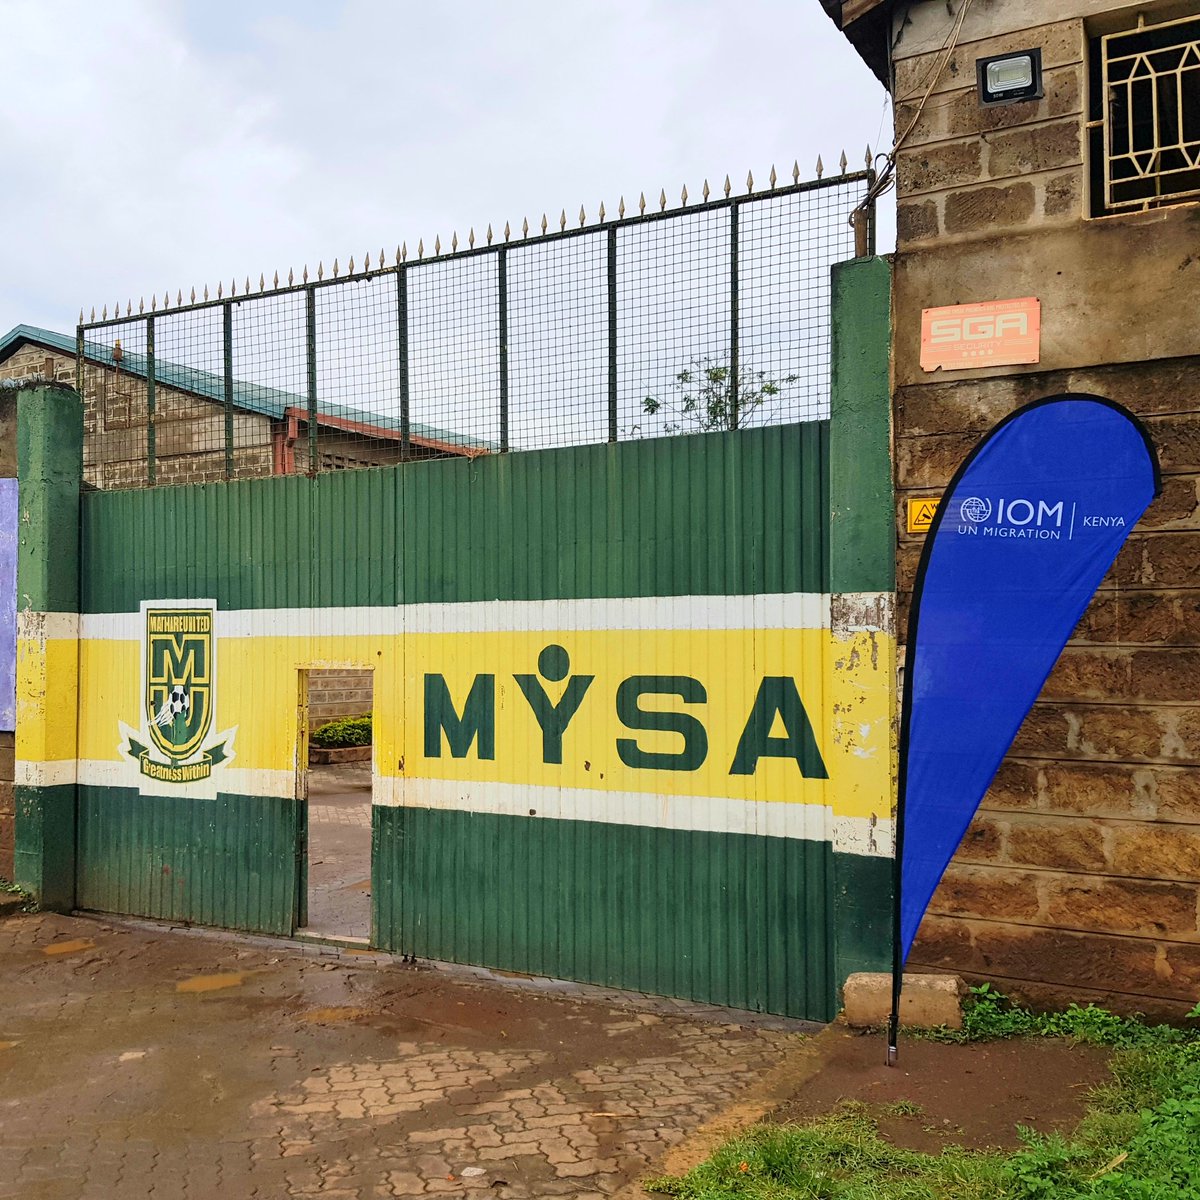 Today, in partnership with @IOMKenya we will be hosting @Mo_Farah, the first IOM Global Goodwill Ambassador as we launch the first MYSA digital Hub at MYSA Offices. @Mo_Farah will also take part in the inclusive 7-aside Immigrants tournament. #MYSA2087 #Score4Migration